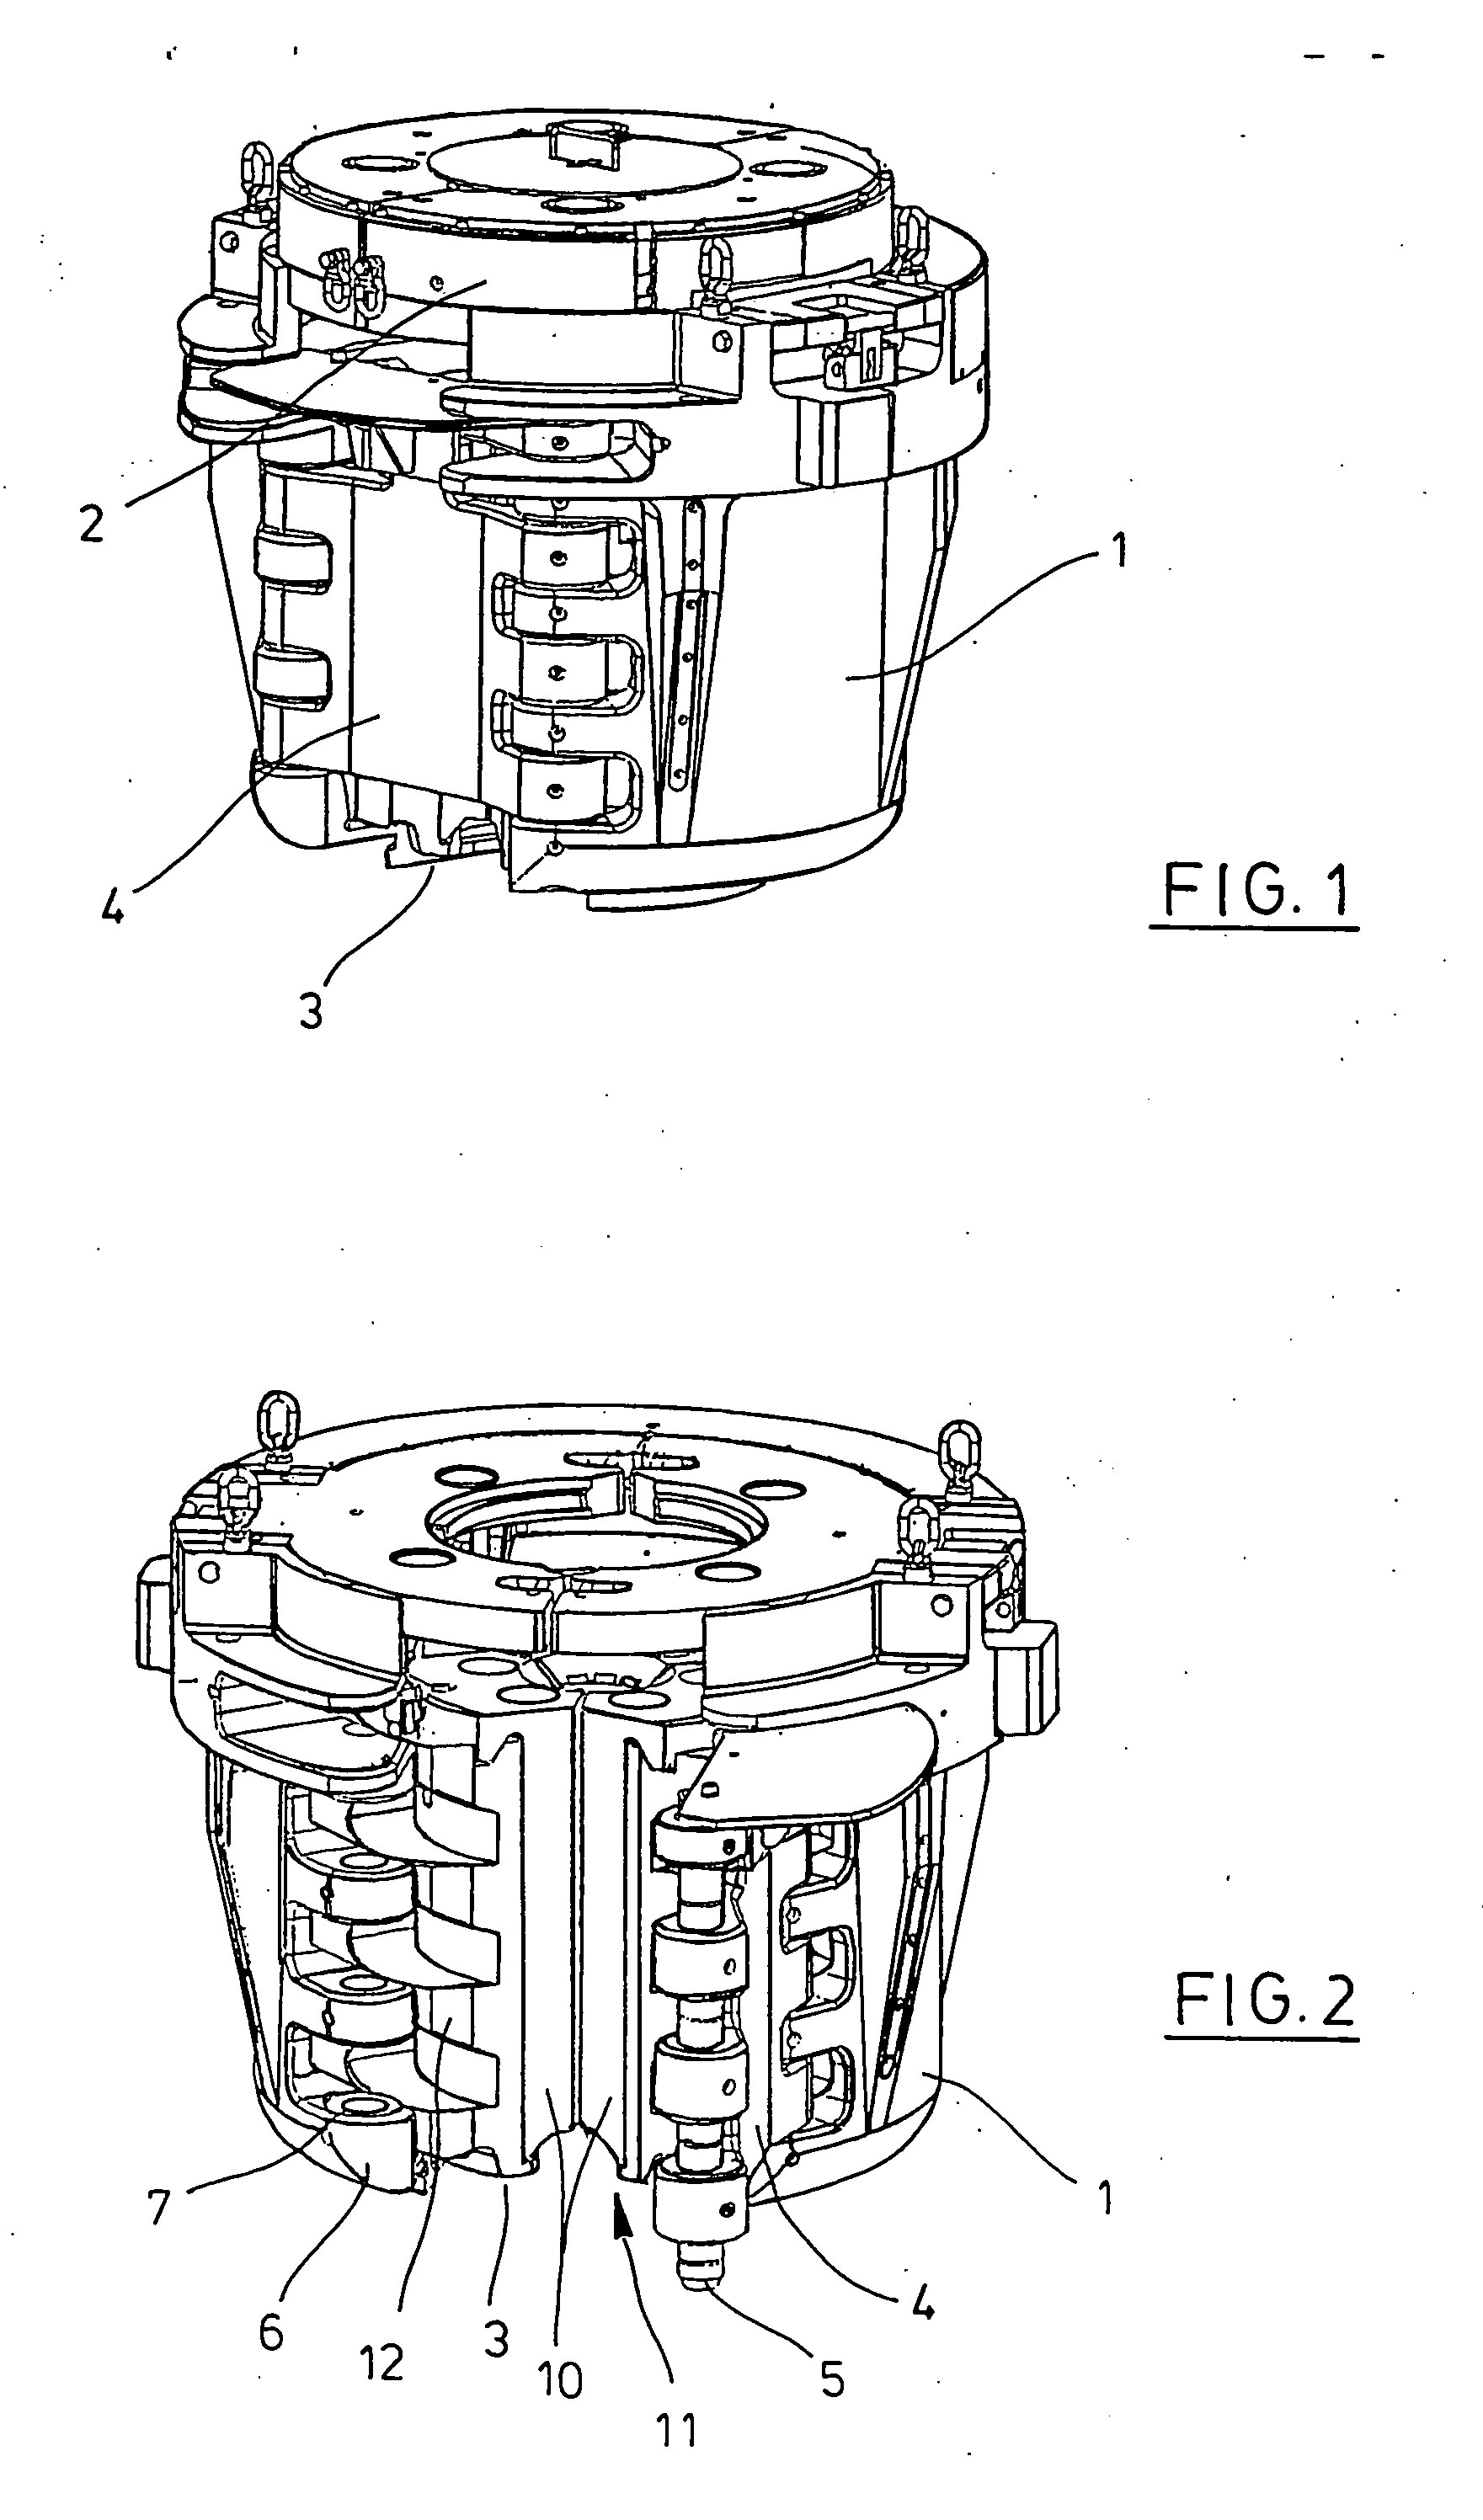 Apparatus for vertically supporting pipes